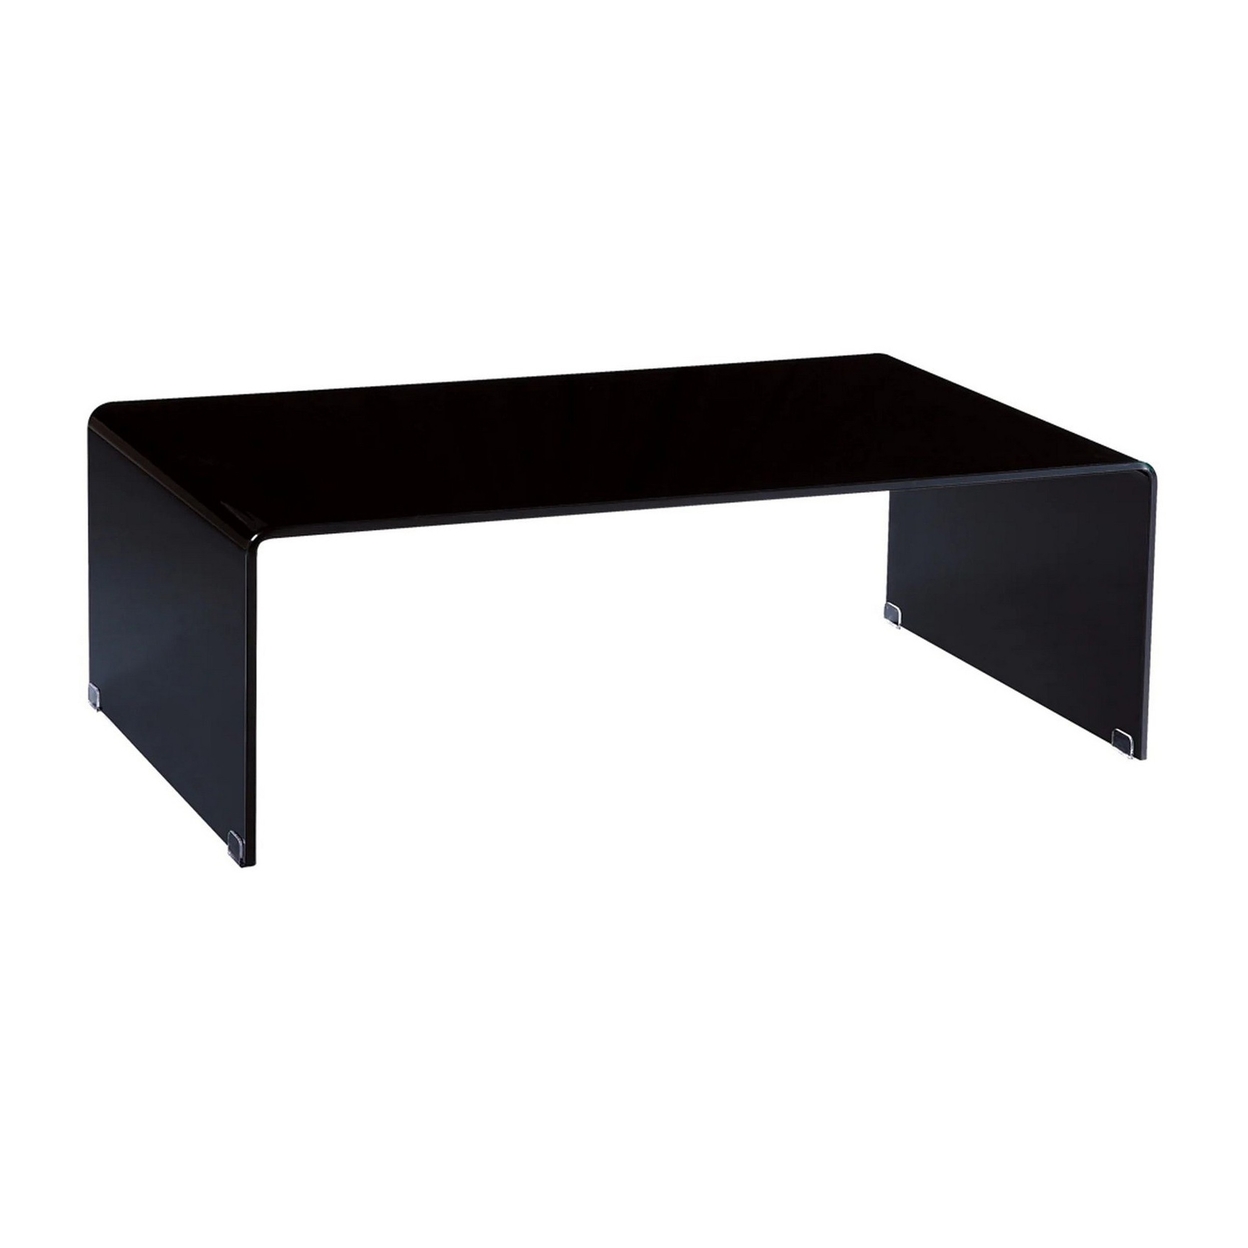 Darb 43 Inch Coffee Table, Black Tempered Glass Tabletop, Curved Edges - Saltoro Sherpi